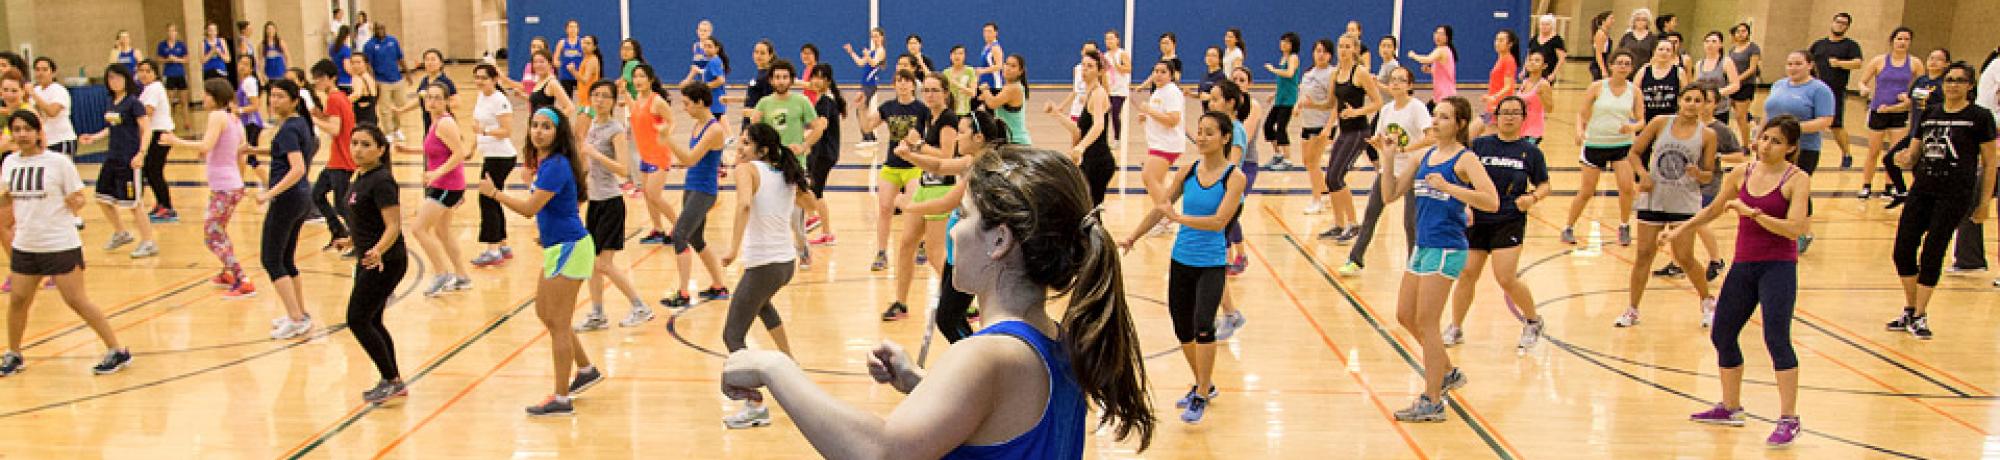 a classroom of people doing Zumba together